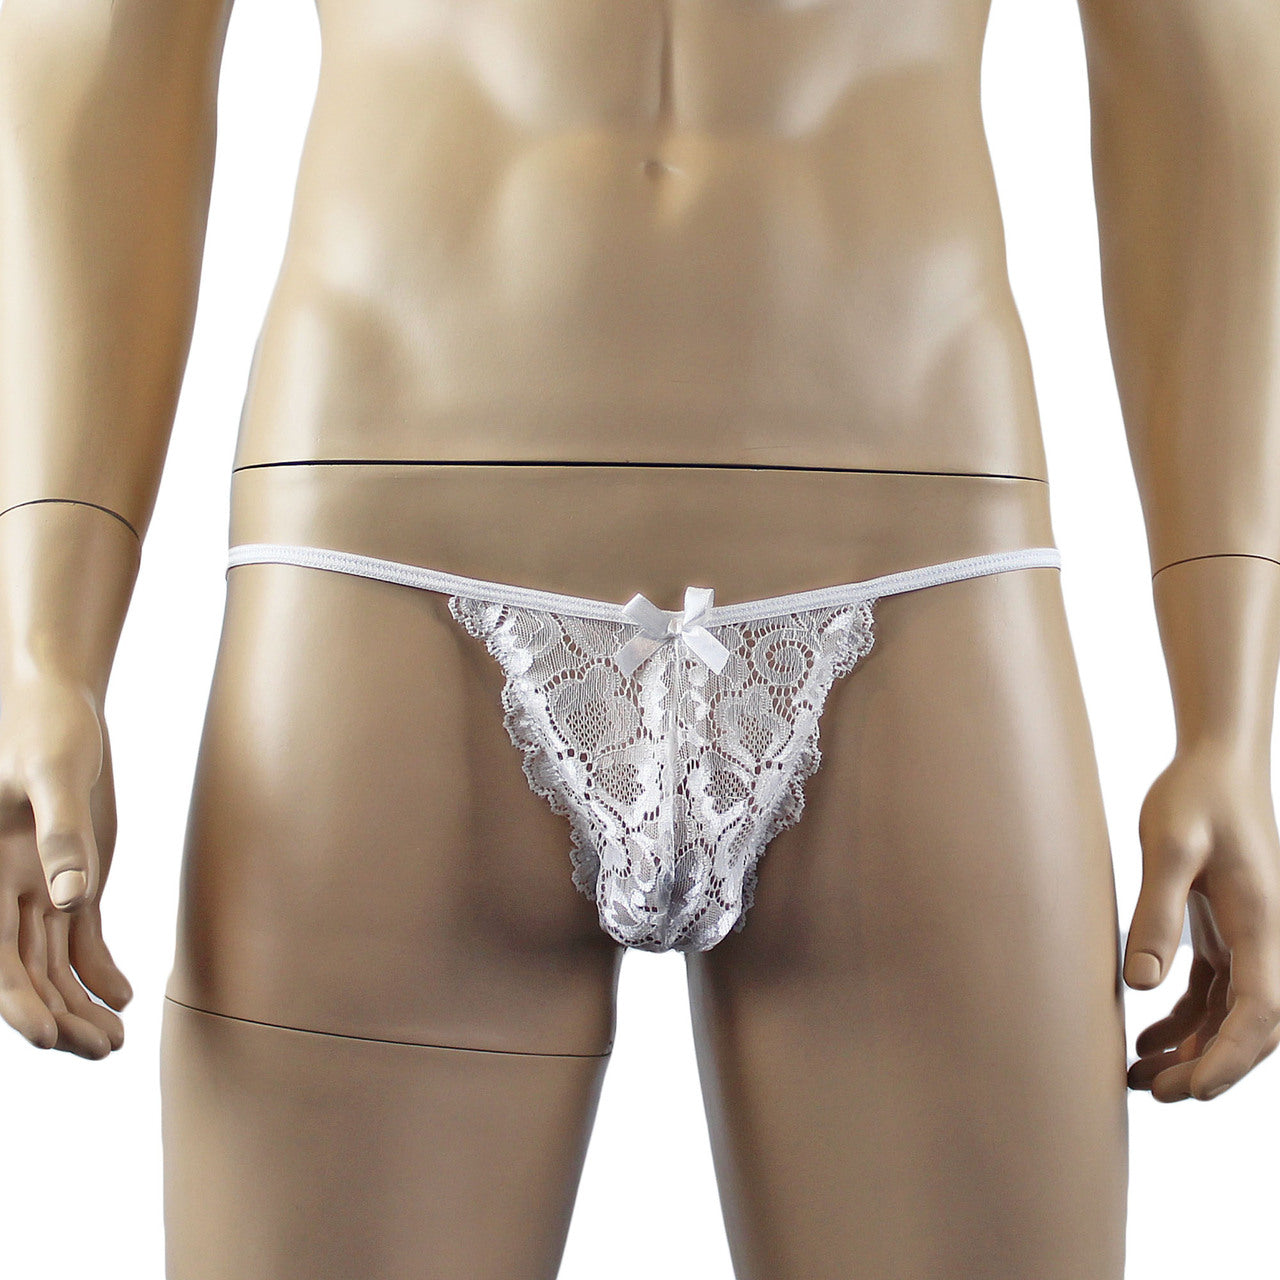 Mens Scalloped Shiny Lace Bra Top and Panty (white plus other colours)